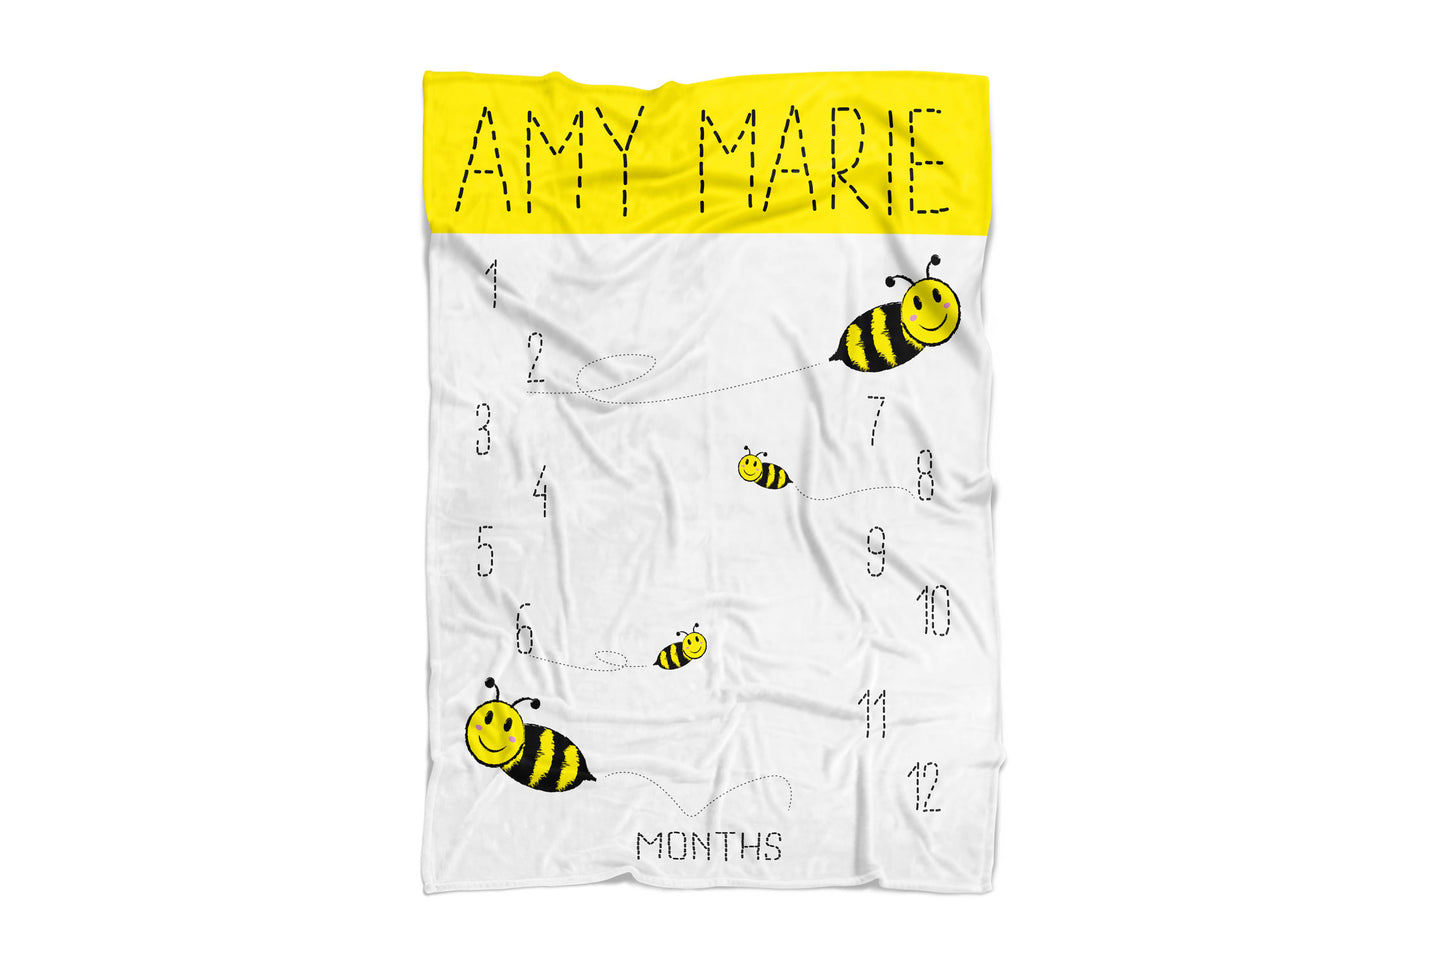 Baby Milestone Blanket - Bumble Bee - Personalized Baby Blanket - Track Growth and Age - New Mom Baby Shower Gift - Black and Yellow